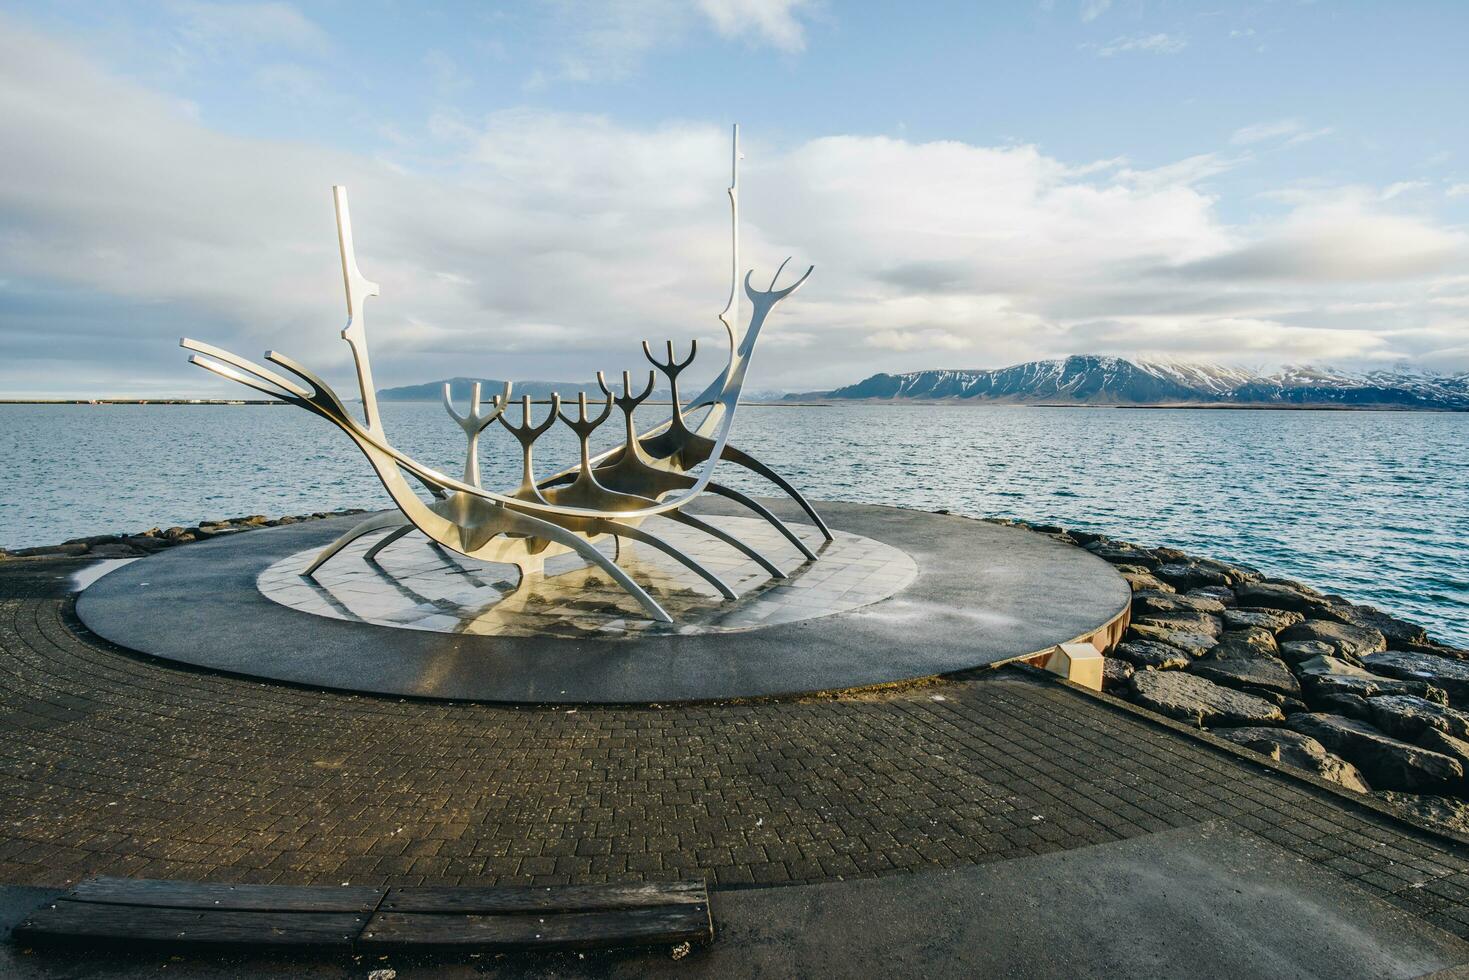 Reykjavik, Iceland - March 23 2016 - The Sun Voyager one of the Icelandic famous sculpture in Reykjavik the capital city of Iceland. photo